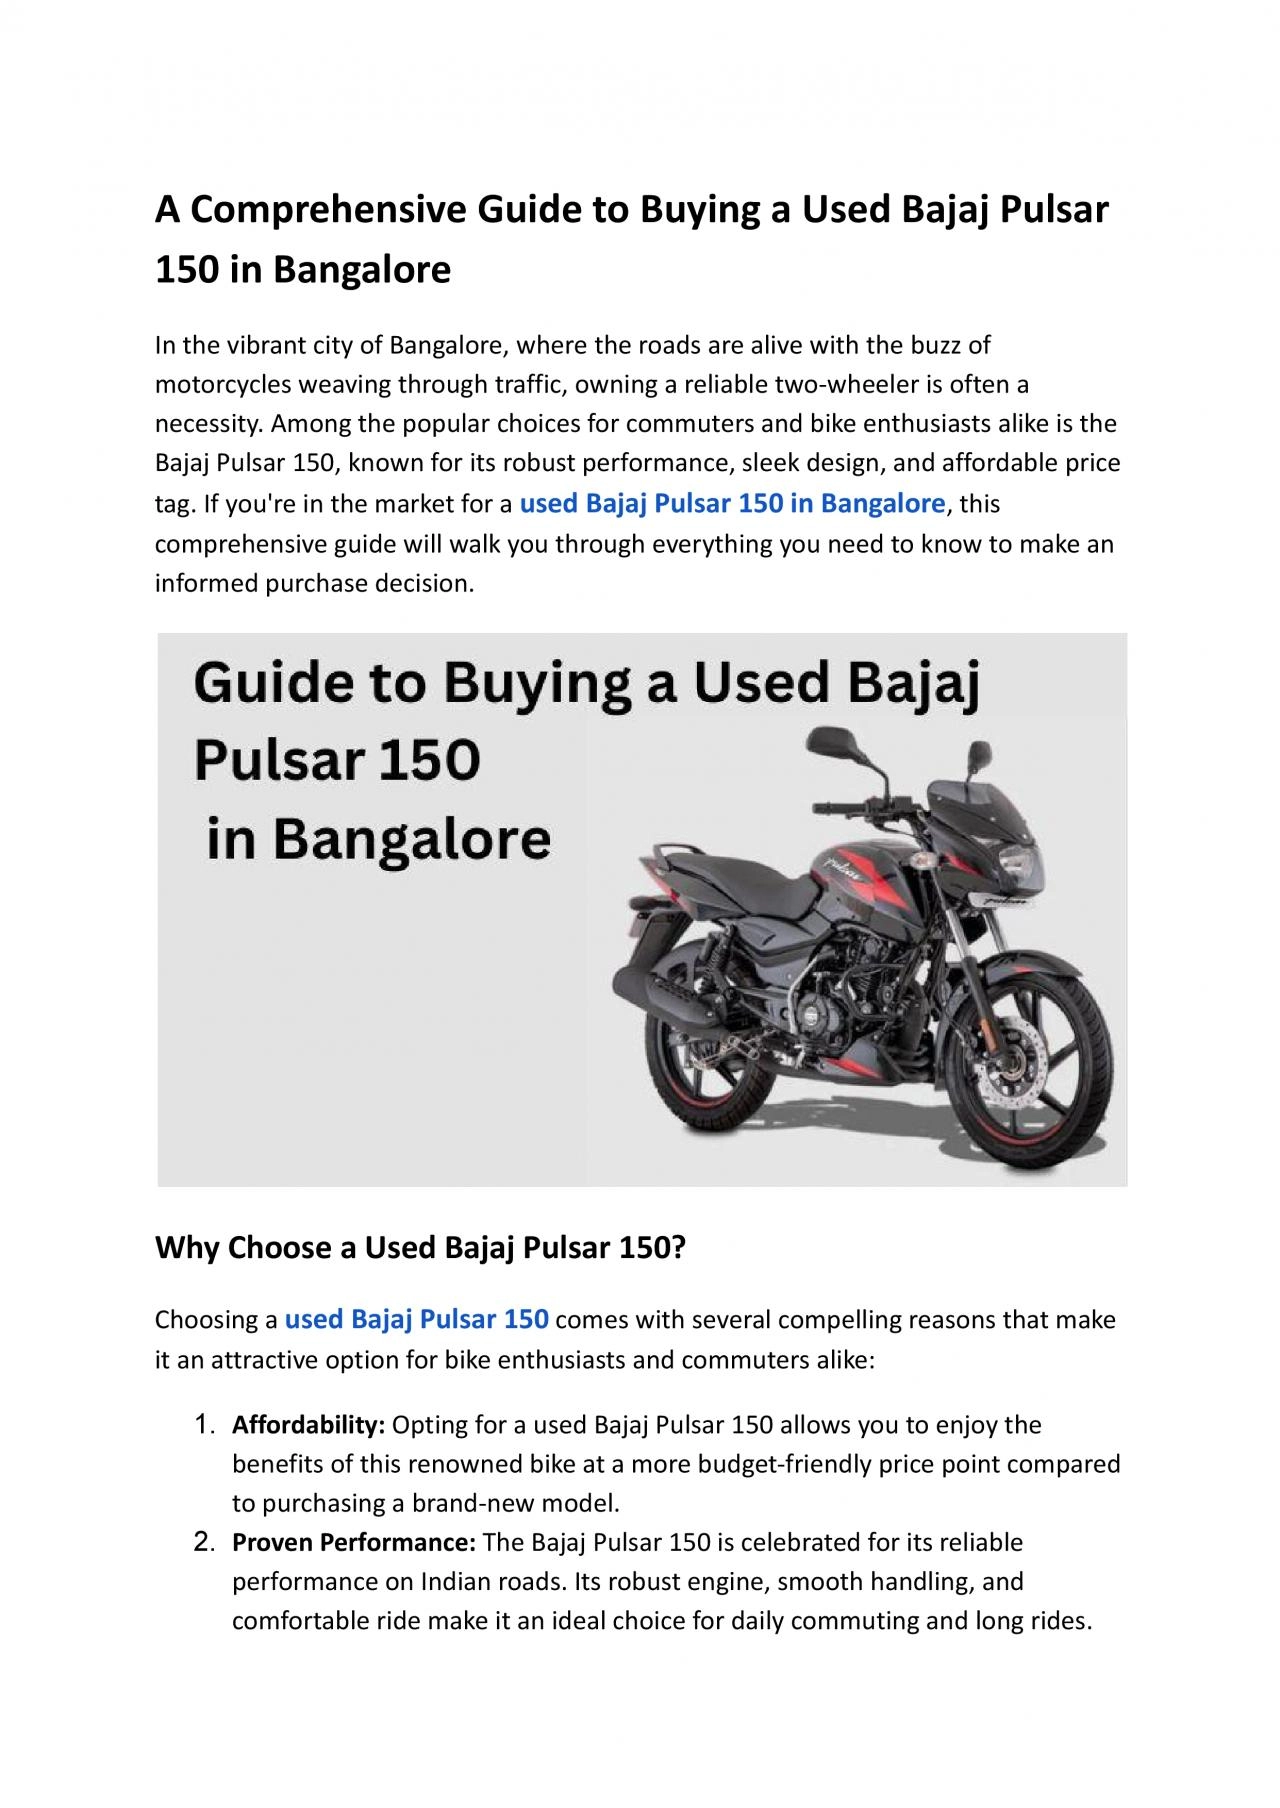 A Comprehensive Guide to Buying a Used Bajaj Pulsar 150 in Bangalore